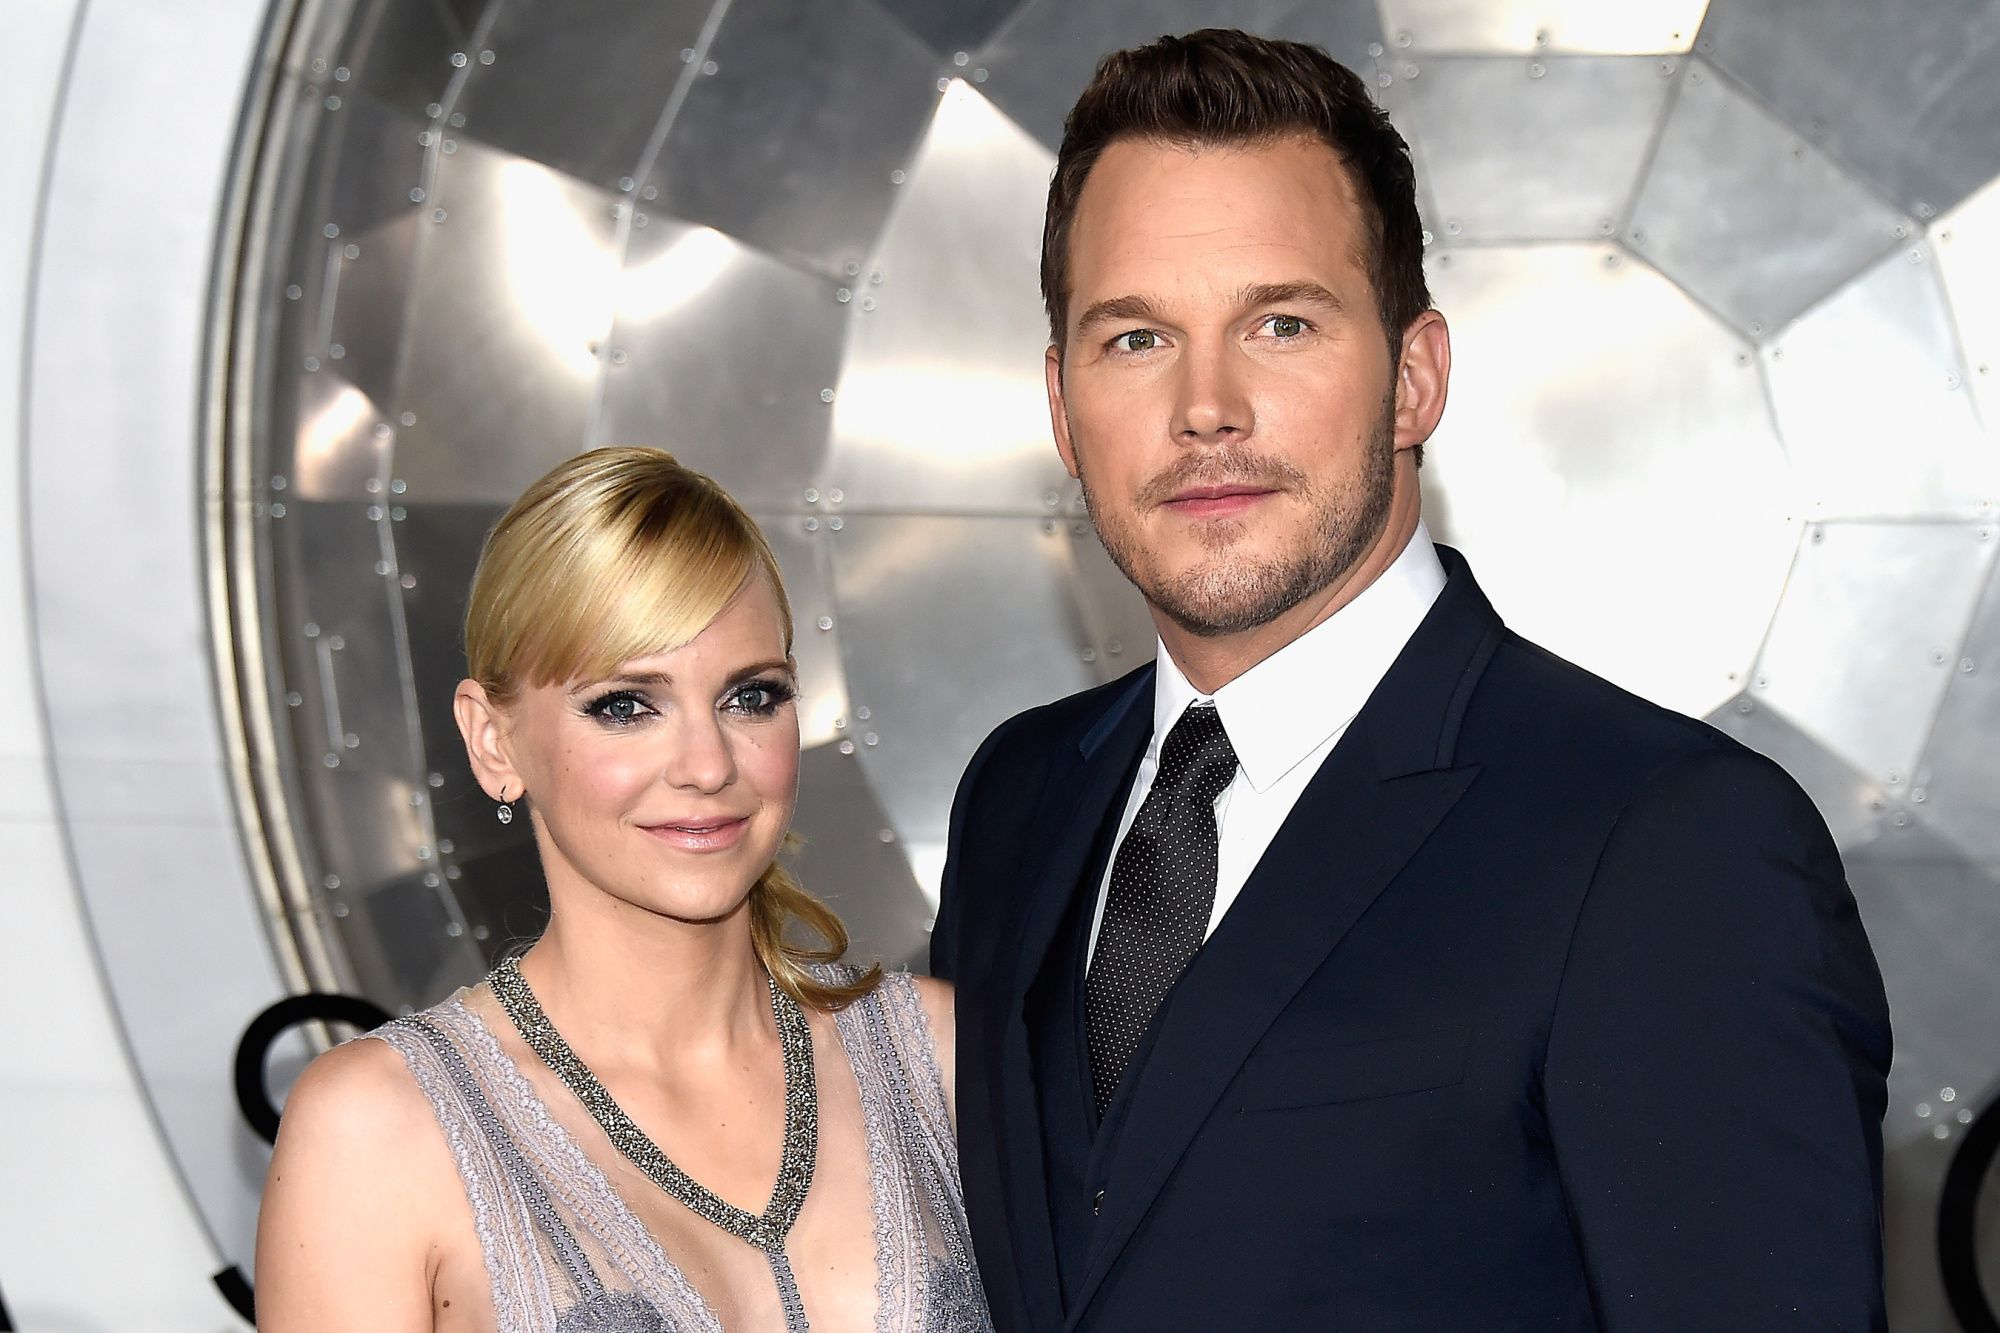 Anna Faris and Chris Pratt during the premiere of Columbia Pictures' "Passengers" at Regency Village Theatre on December 14, 2016 in Westwood, California. | Source: Getty Images